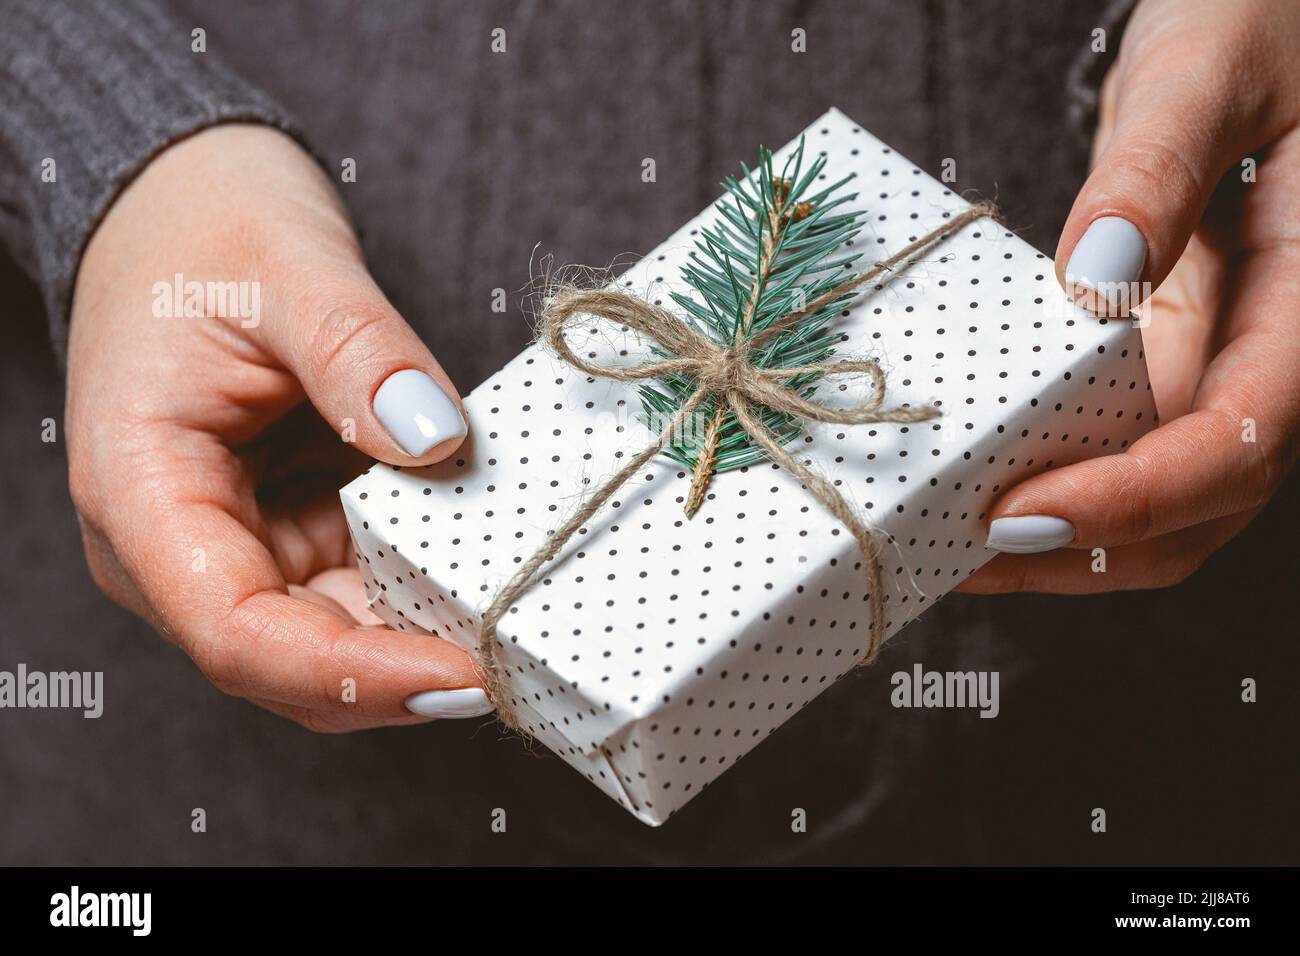 Cute Christmas gift in female hands on background Stock Photo